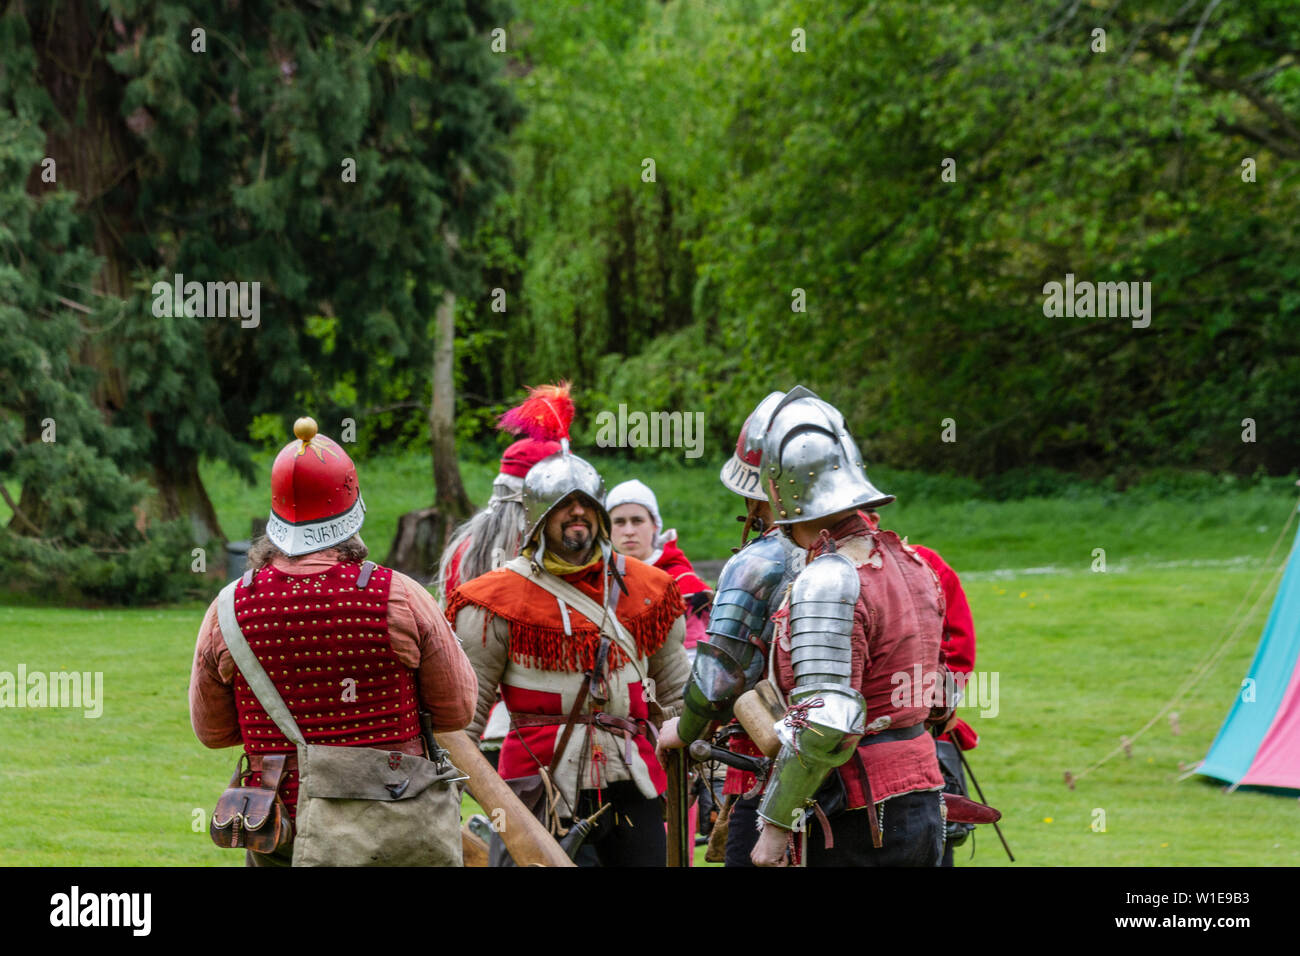 Gathering of people dressed in medieval costume Stock Photo